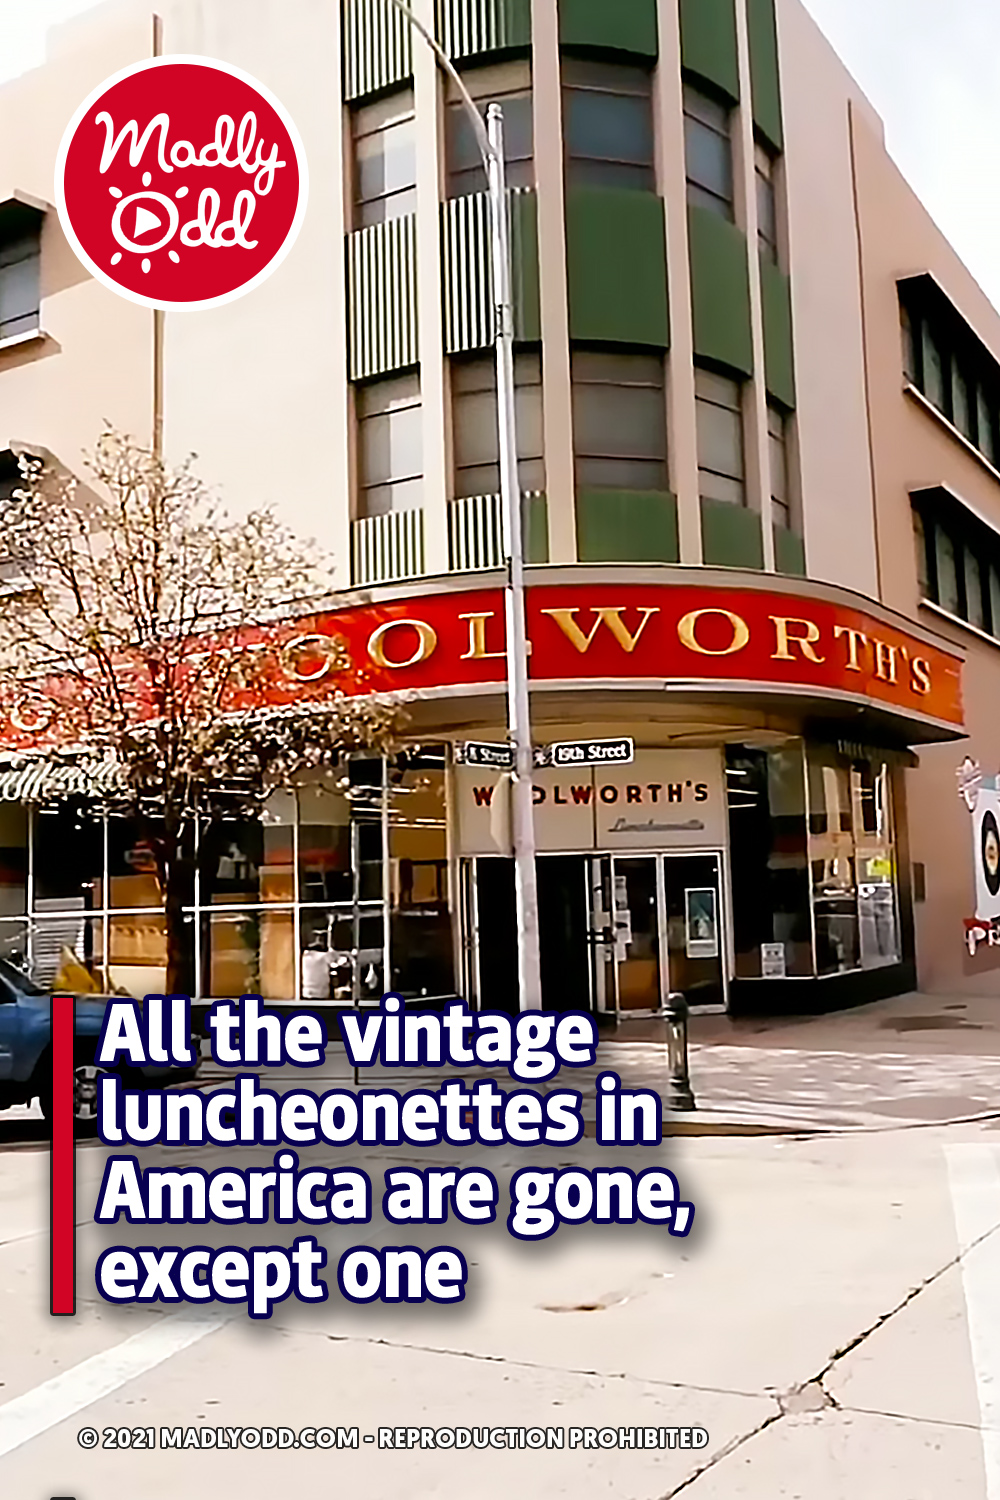 All the vintage luncheonettes in America are gone, except one